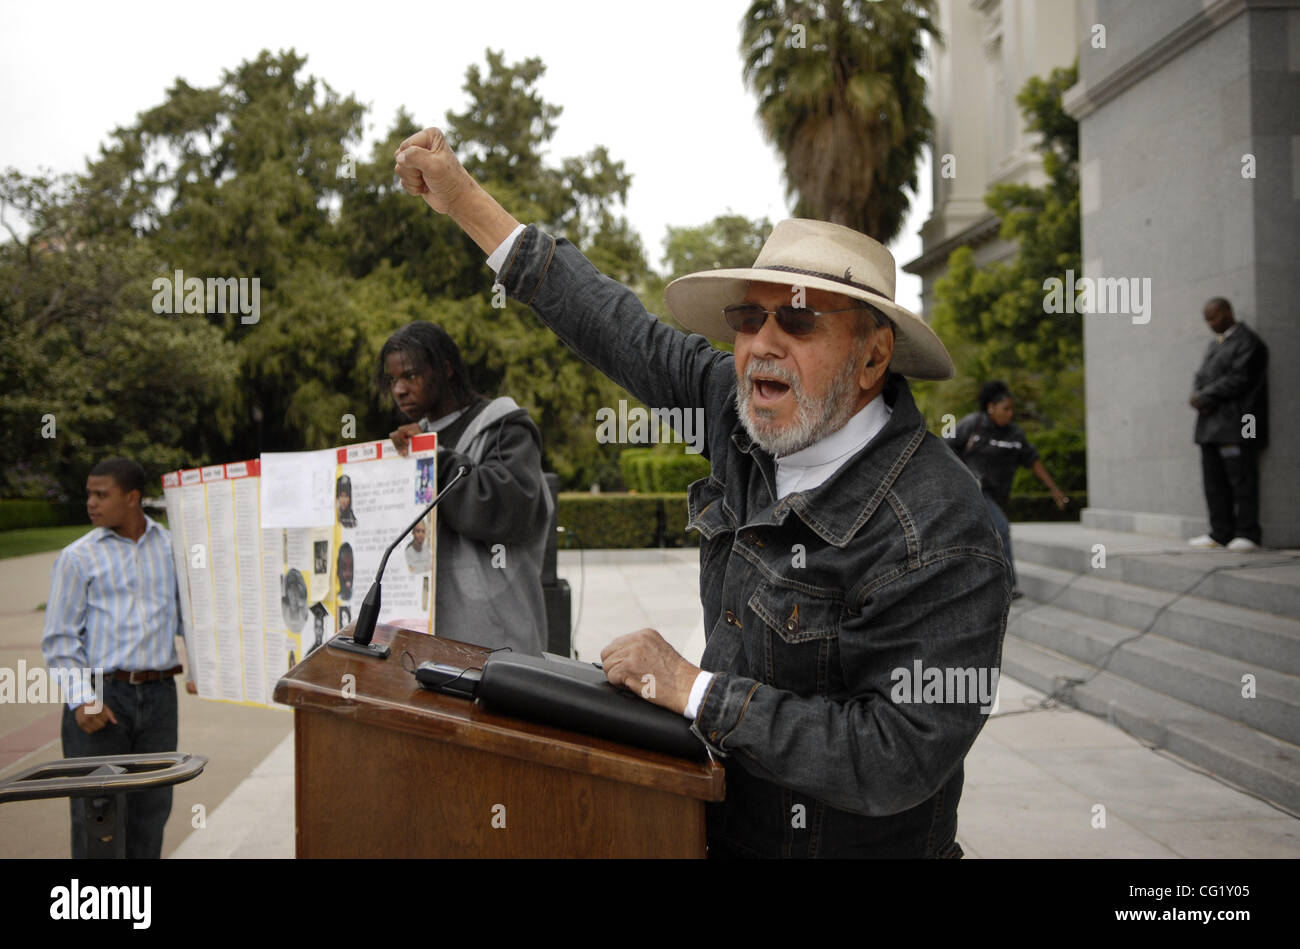 LEDE - Al Rojas, the National Coordinator for Frente De Mexicanos En El Exterior, speaks at the steps of the capital after a march to promote unity between African Americans and Latinos April 22, 2007.  Autumn Cruz/ Sacramento Bee Stock Photo